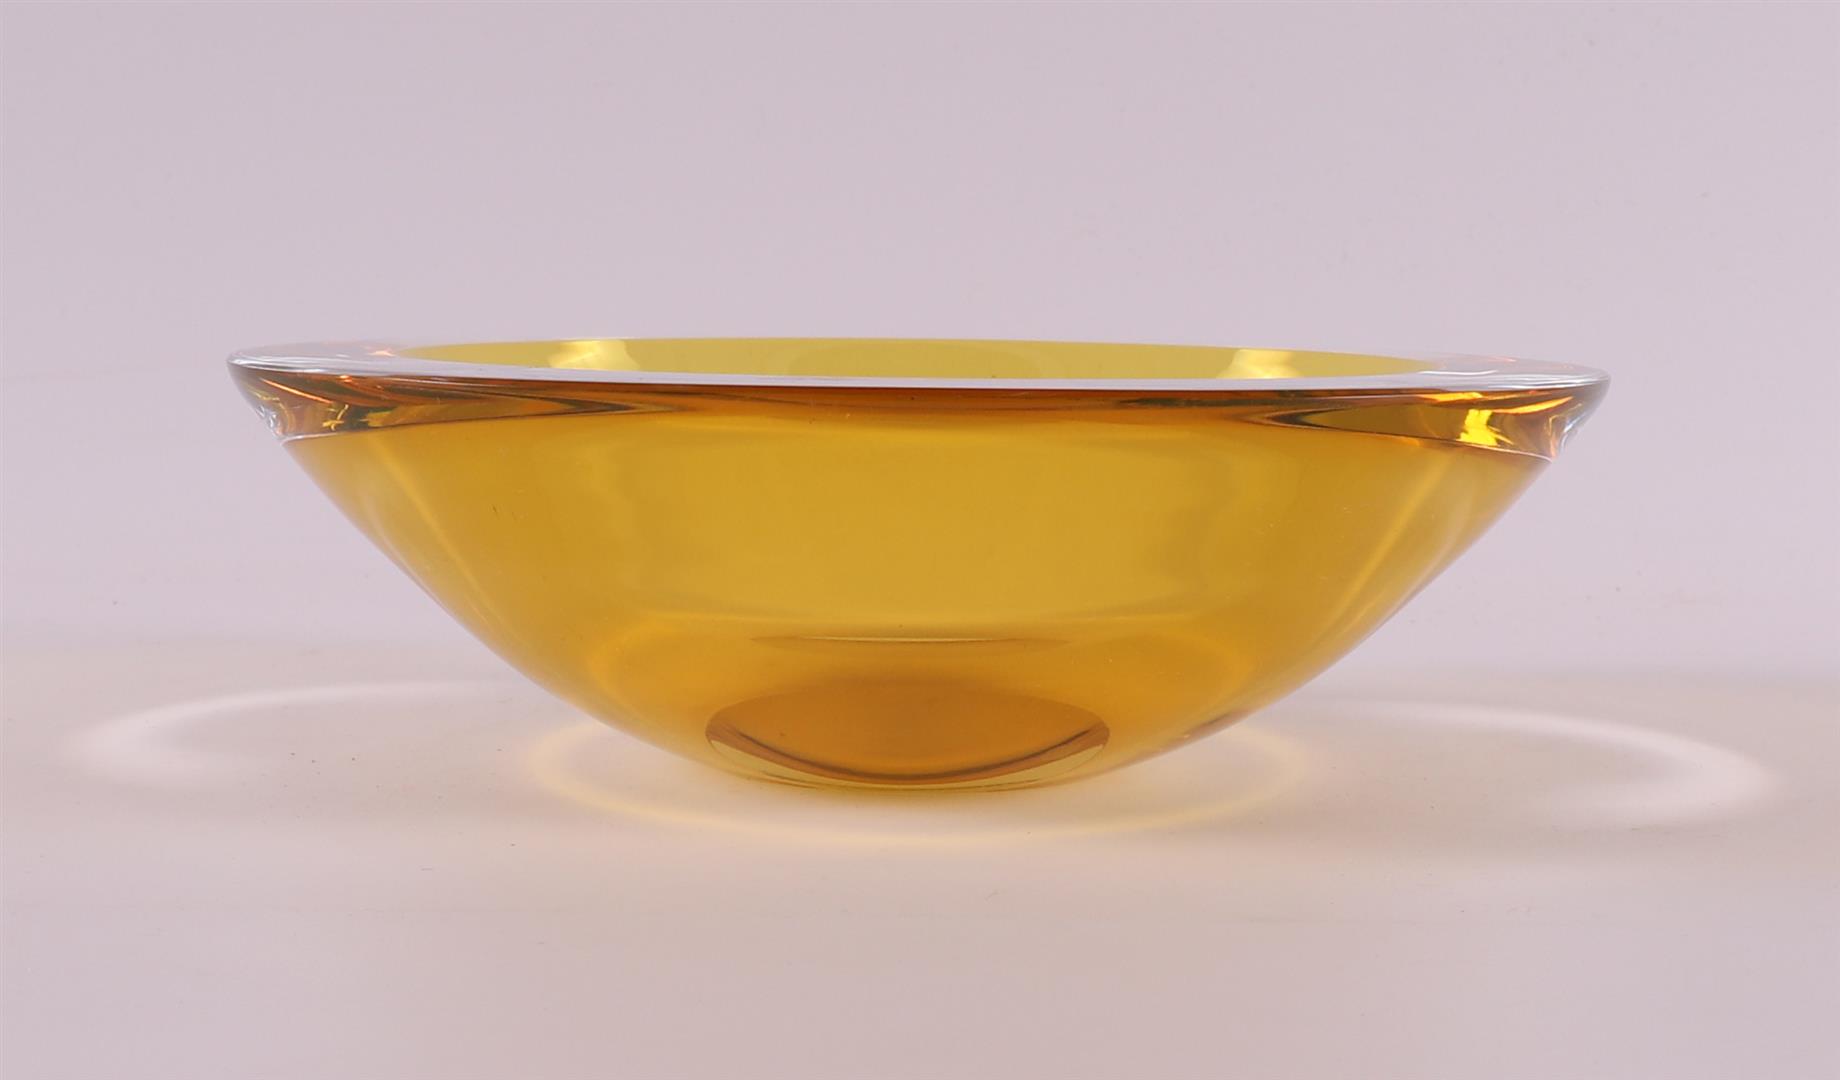 A thick-walled yellow and clear glass bowl, Olaf Stevens (Tilburg 1994-). - Image 2 of 4